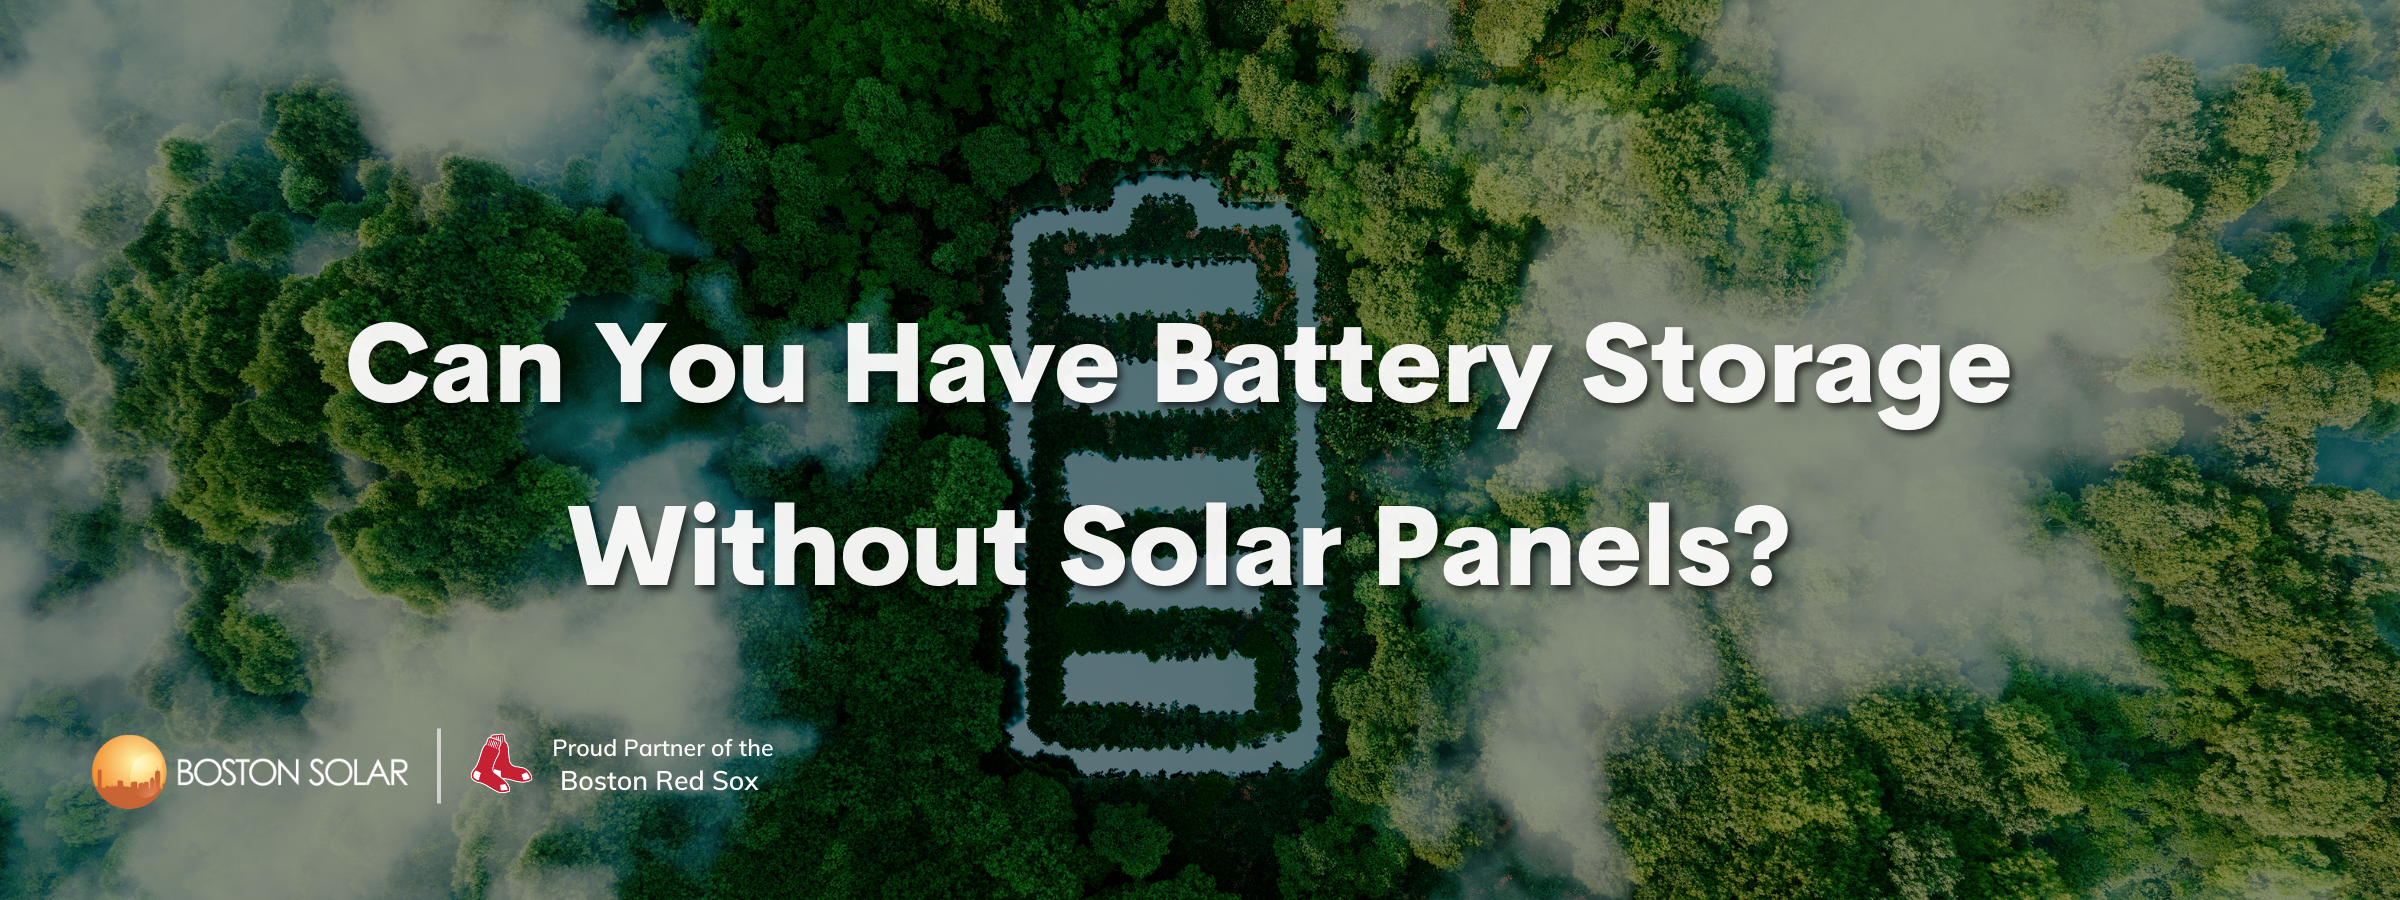 Can You Have Battery Storage Without Solar Panels?